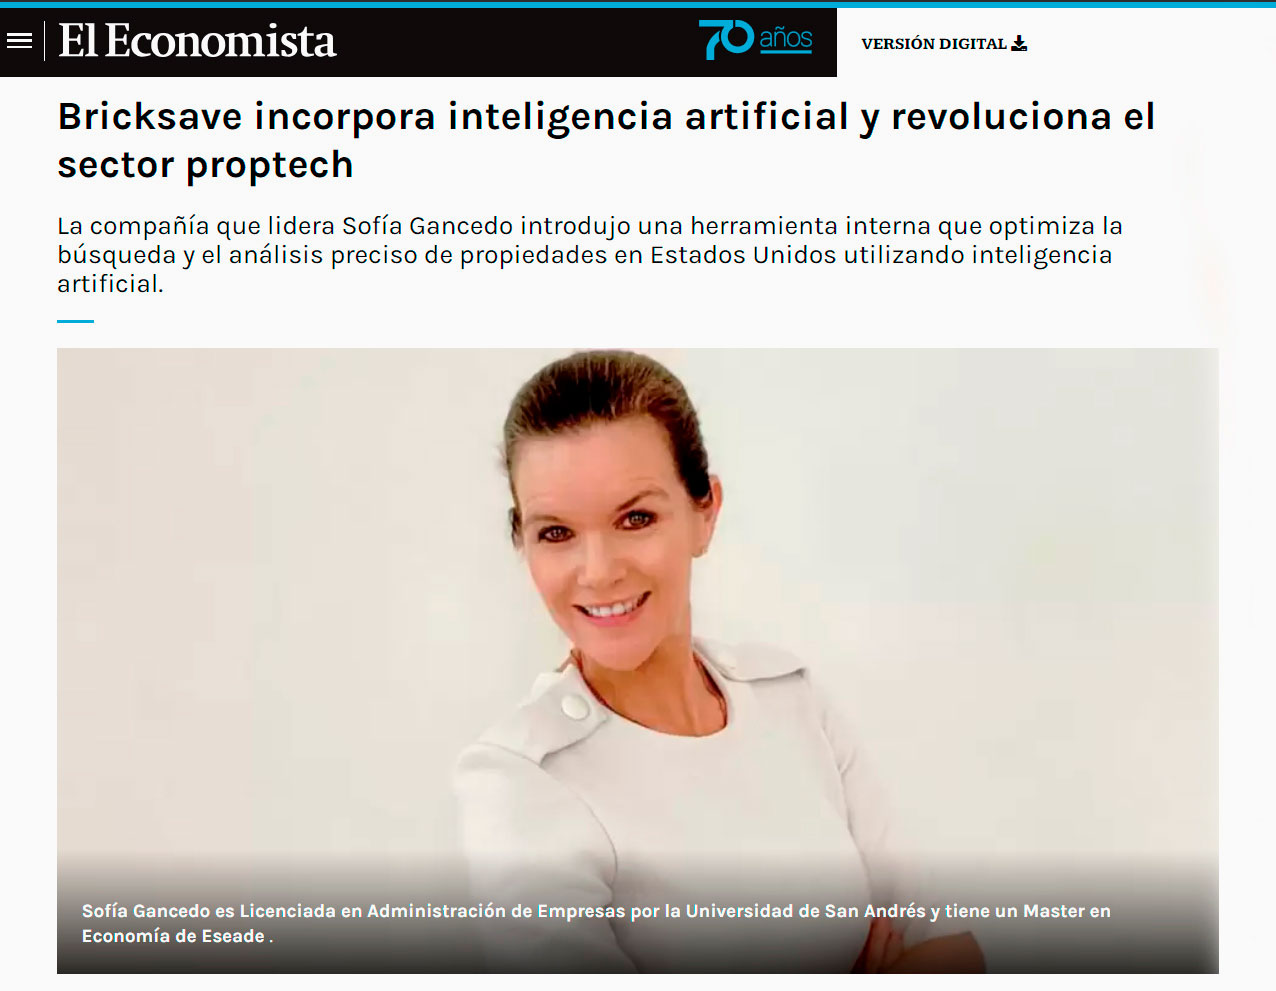 Bricksave in the press: El Economista: Bricksave incorporates artificial intelligence and revolutionises the proptech industry